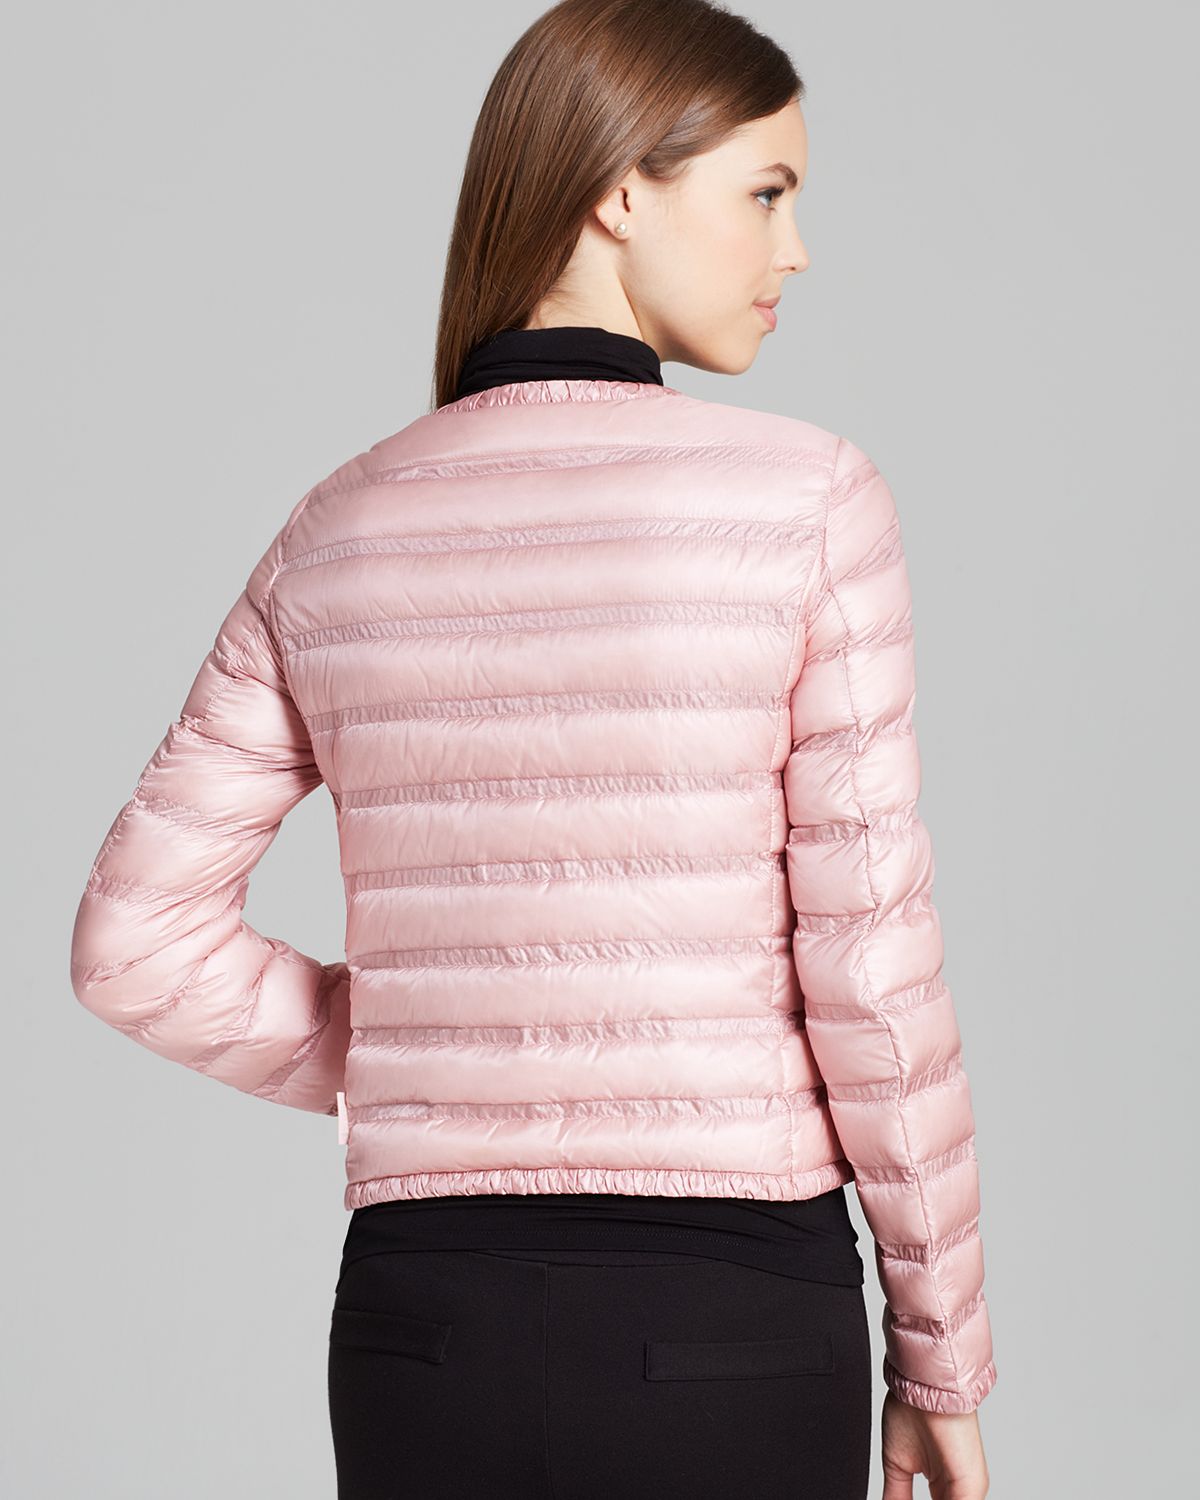 Lyst - Moncler Lissy Lightweight Down Jacket in Pink